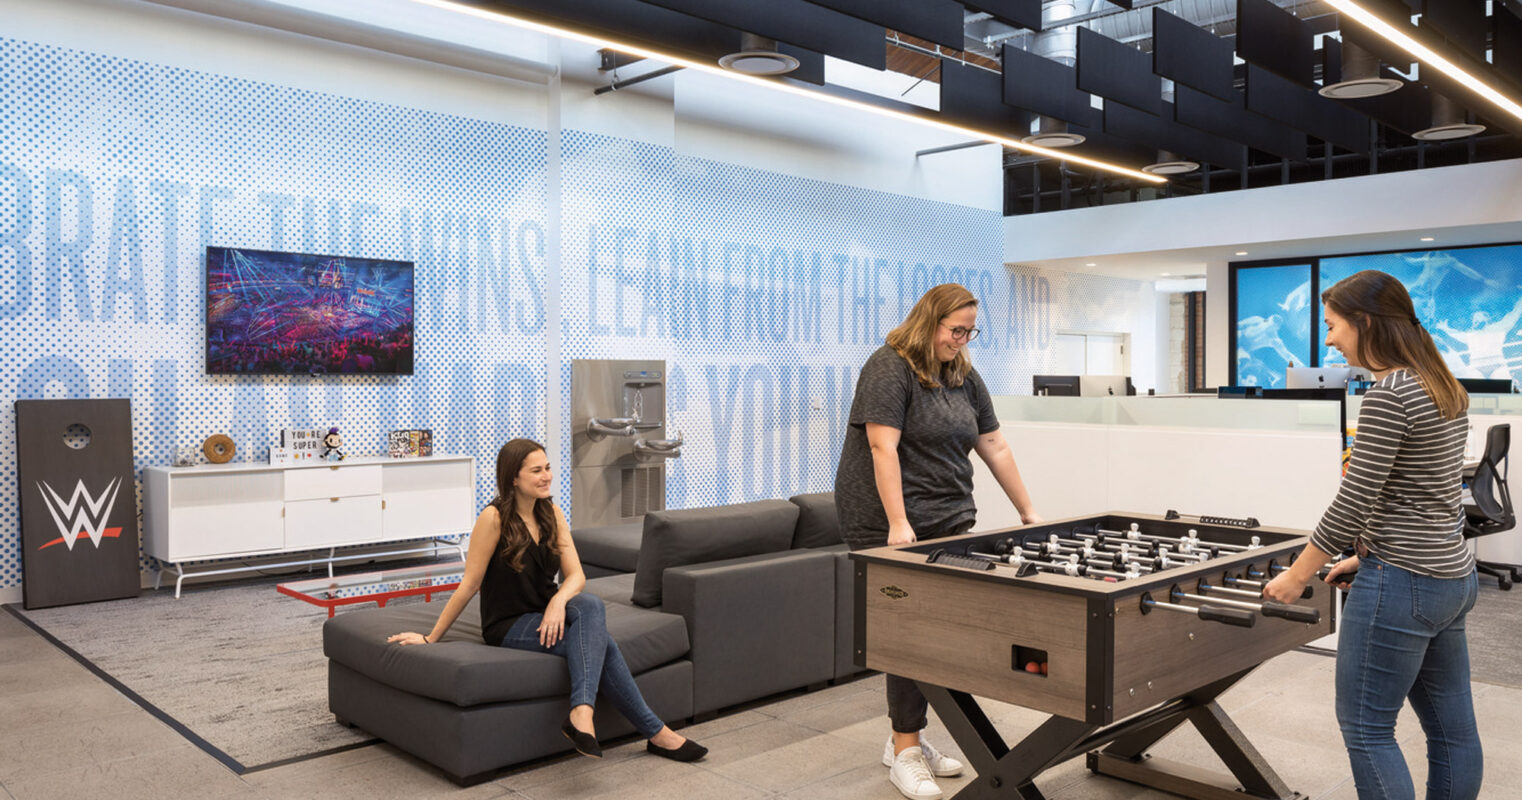 Modern office lounge with relaxed seating, a foosball table, and vibrant blue graphic wall featuring WWE branding. The space is designed for recreation, collaboration, and emphasizes the company's dynamic culture.